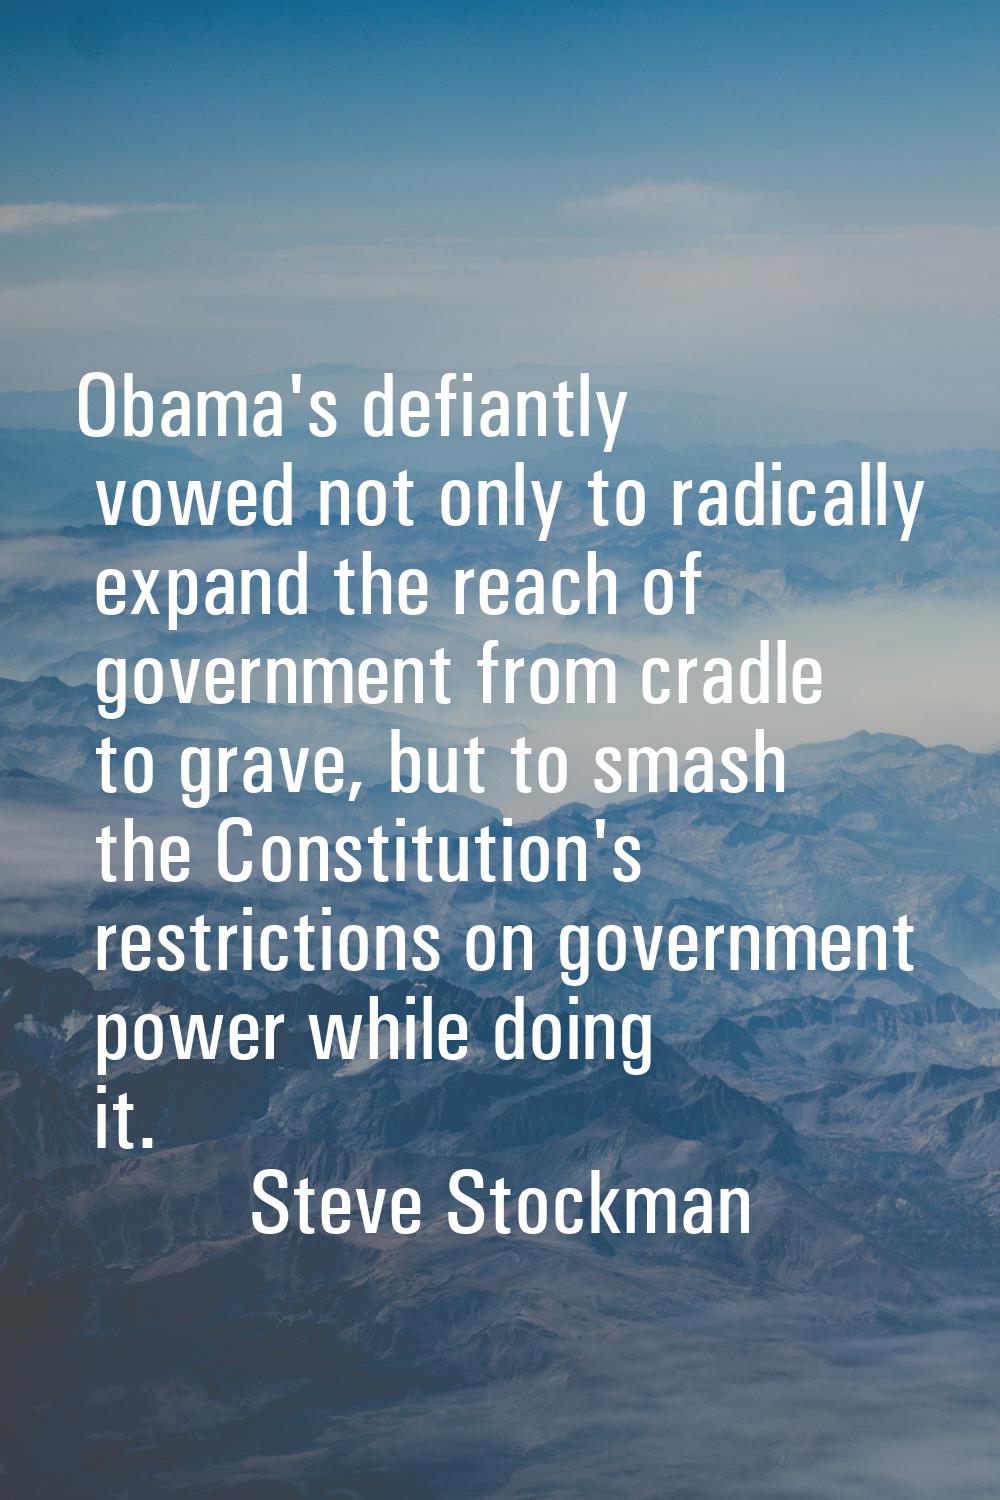 Obama's defiantly vowed not only to radically expand the reach of government from cradle to grave, 